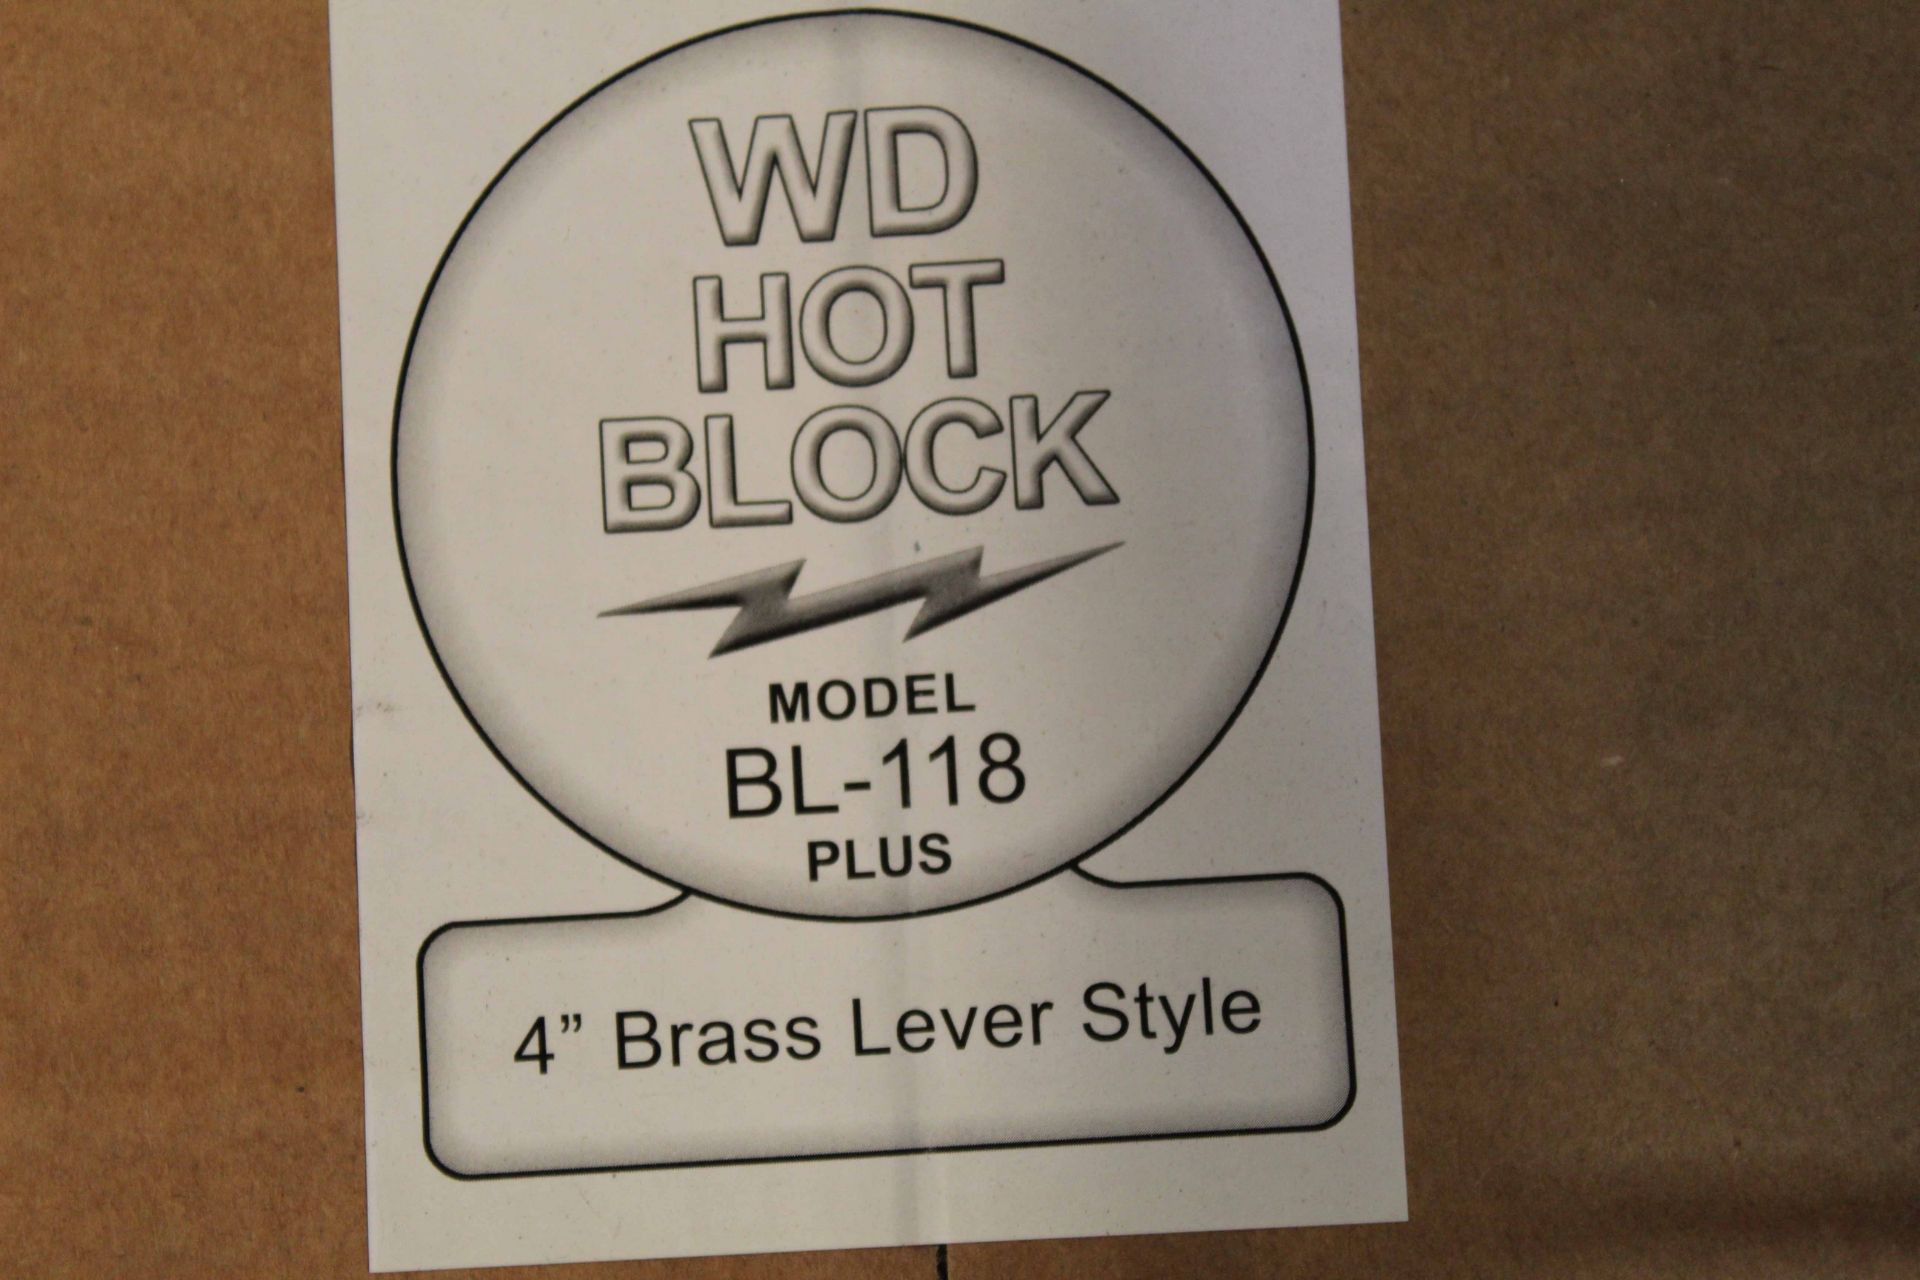 LOT OF WD HOT BLOCKS, MDL. BL-118, new (9 sets) (for 4" butterfly valves) - Image 3 of 3